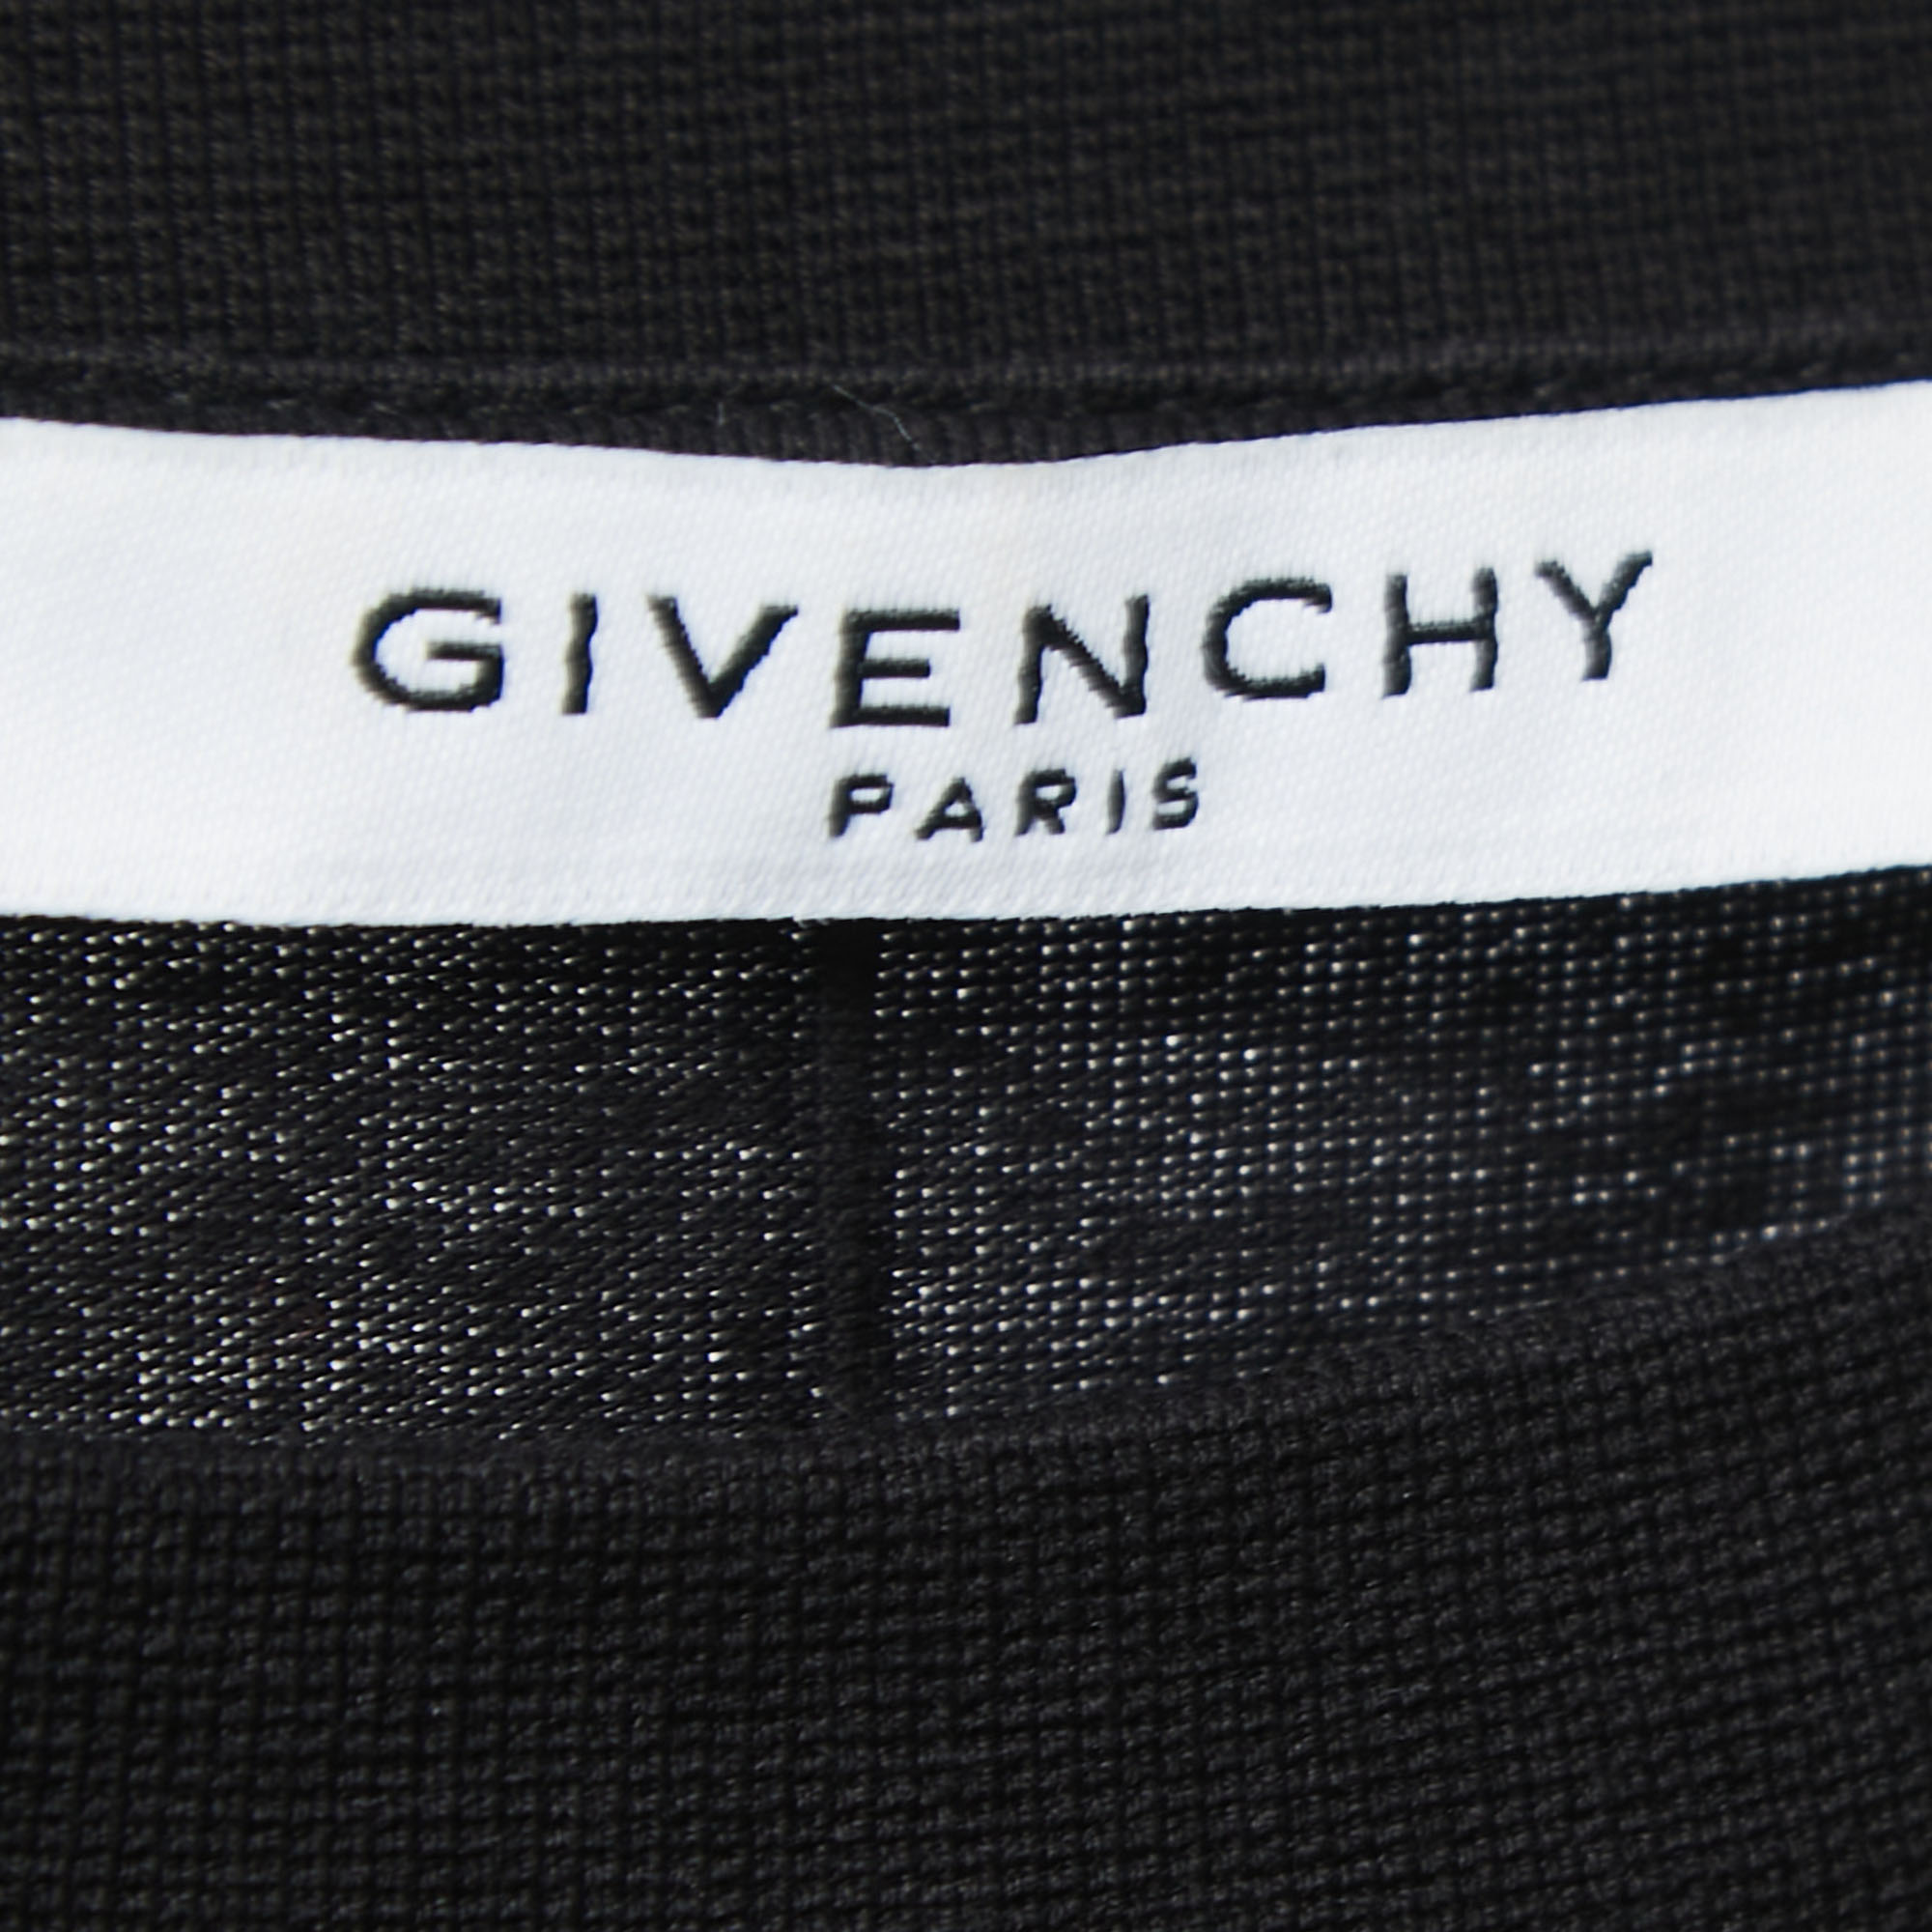 Givenchy Black Cotton Baby's Breath Madonna Printed T-Shirt S